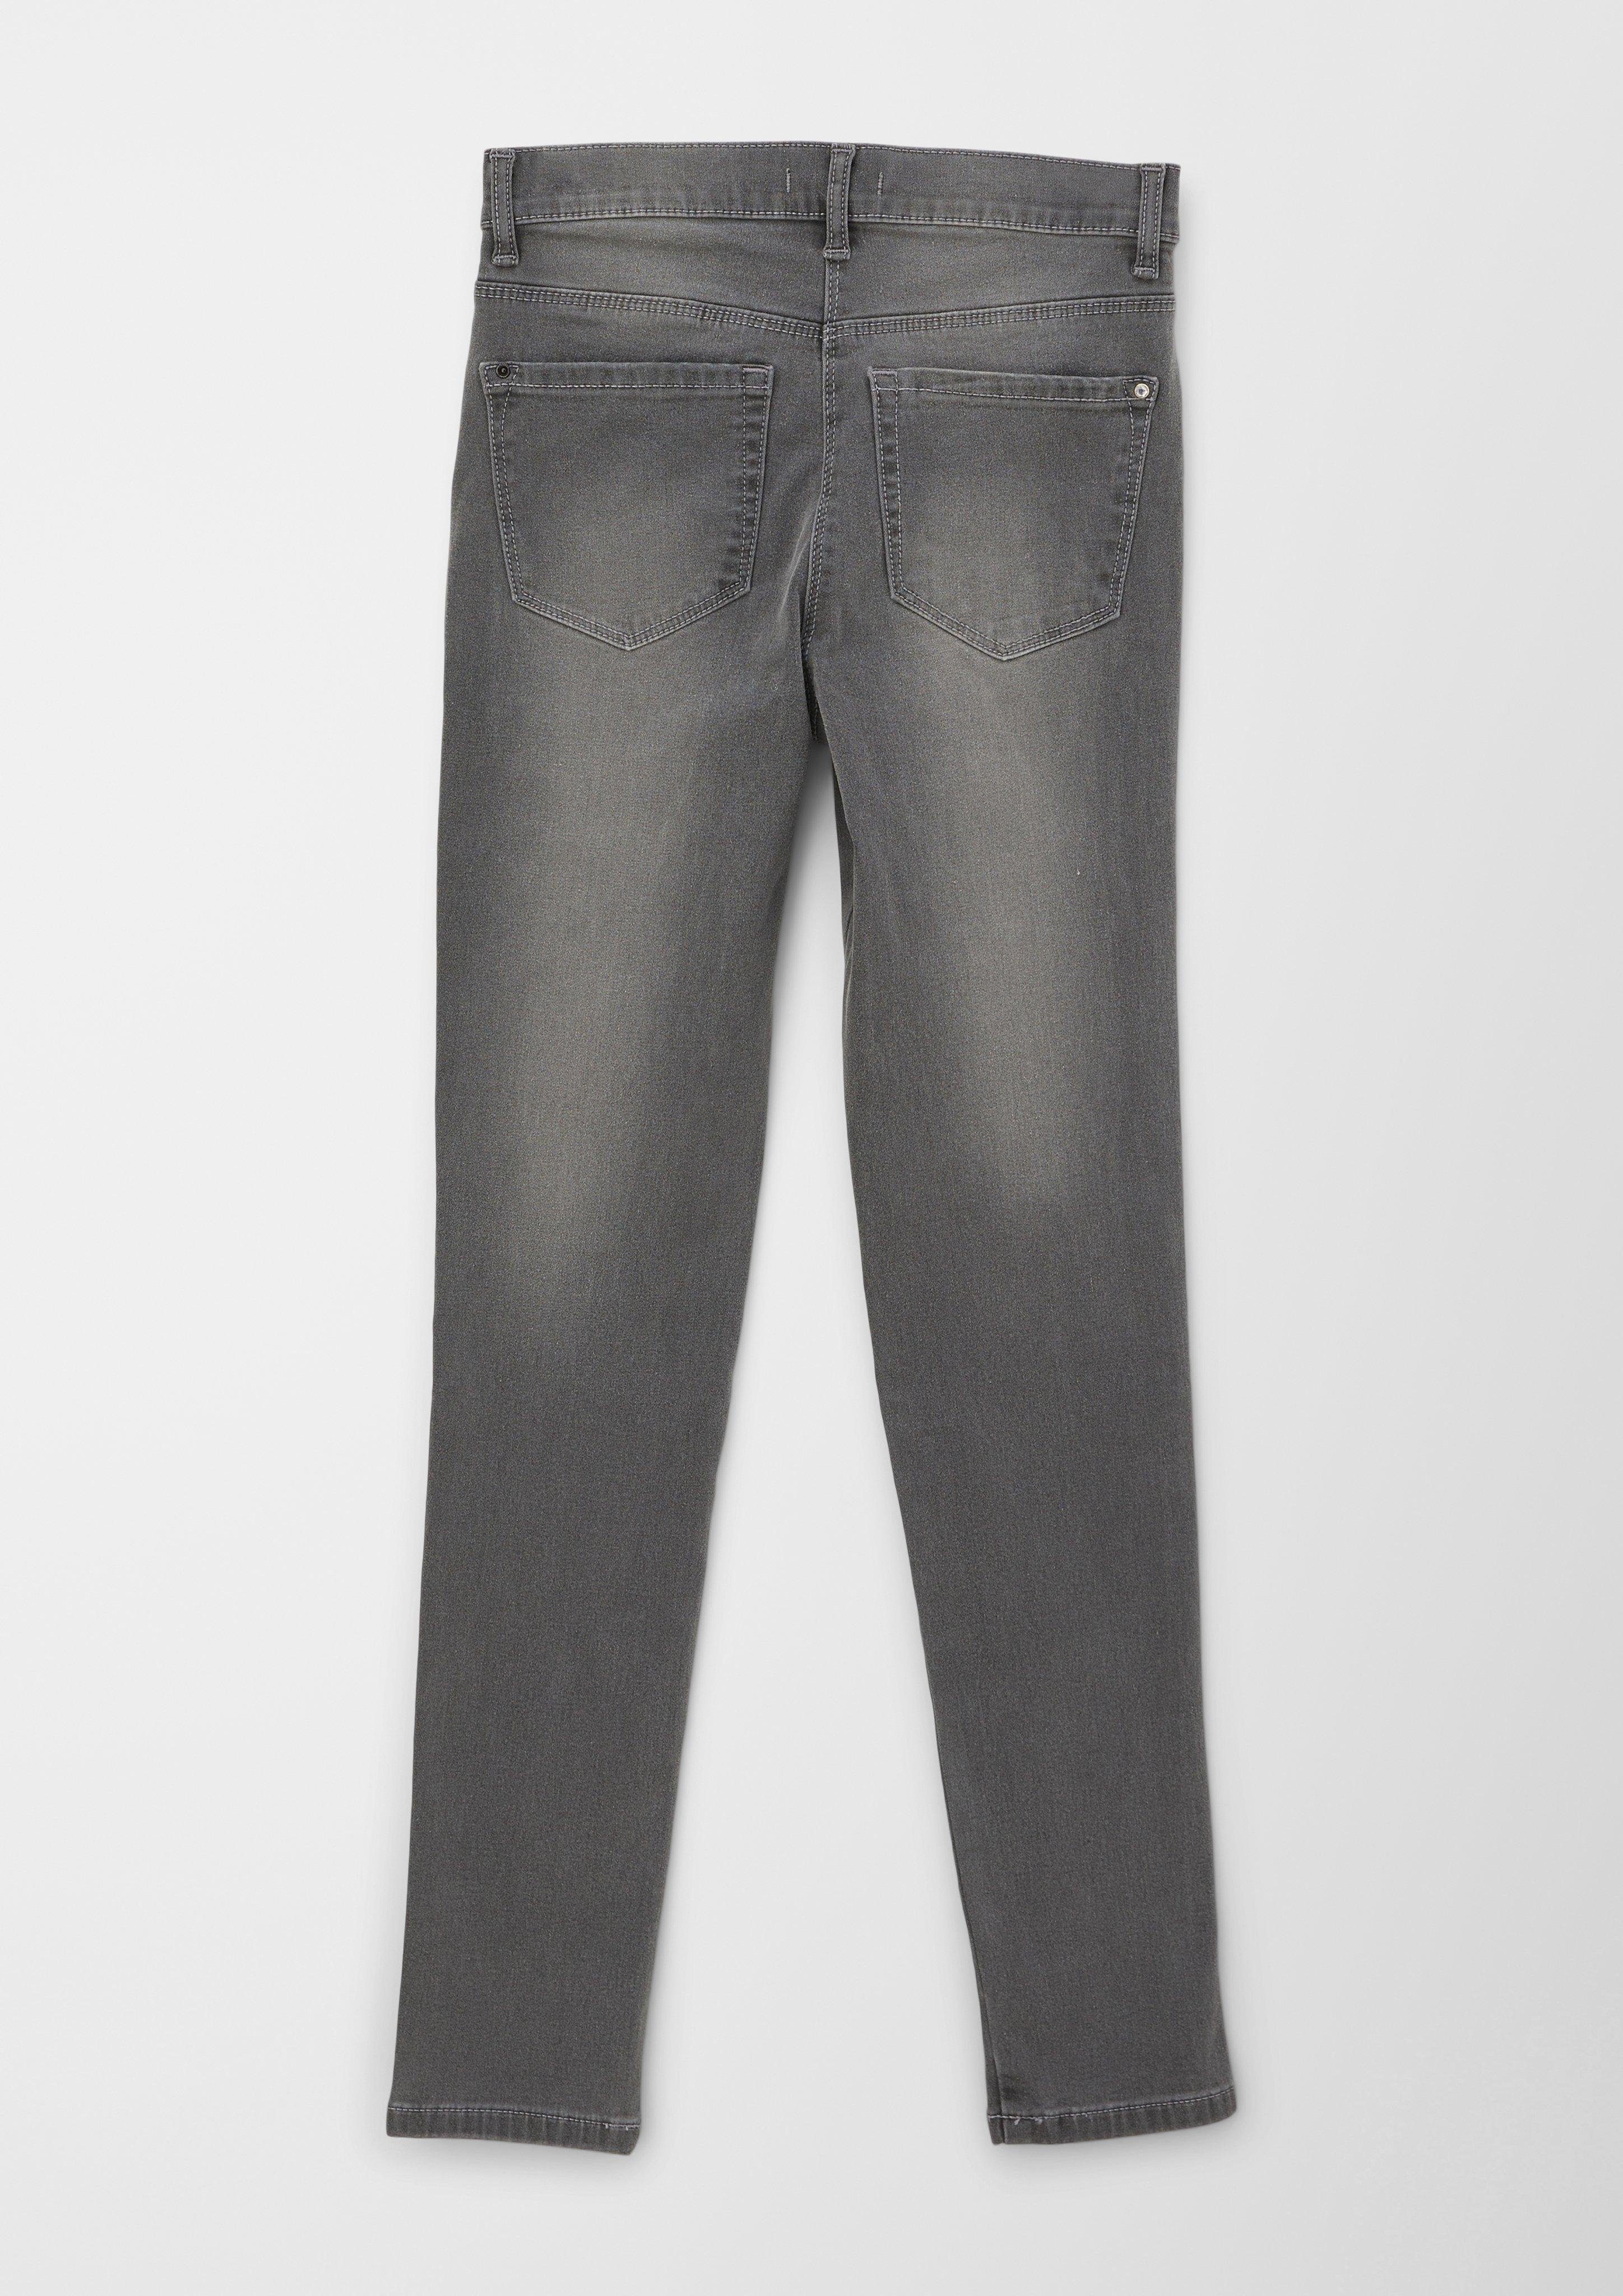 Suri Skinny Skinny High / Fit s.Oliver Stoffhose Leg Rise Jeans / Skinny / Waschung